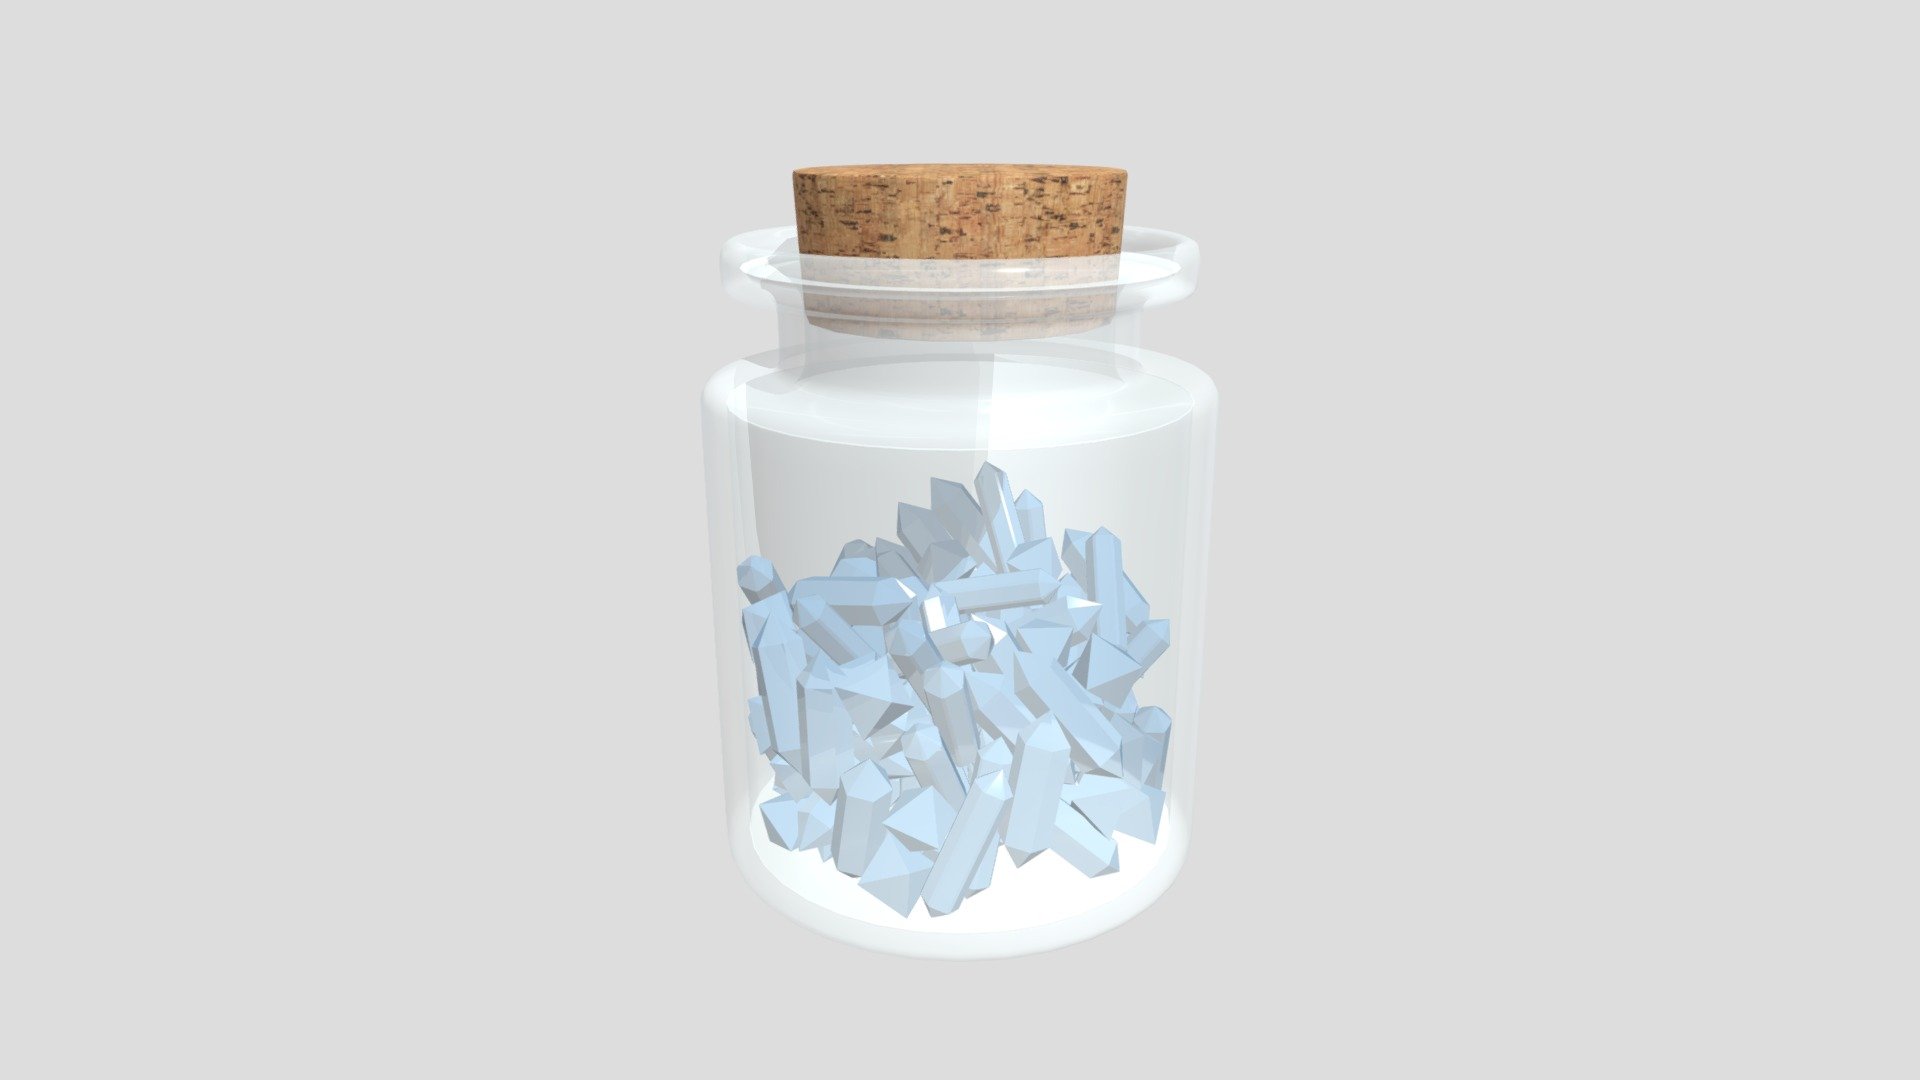 Glass jar with cork stopper, filled with blue crystals in 3 different shapes. Would suit boho, witchy, apothecary, arcane or magical settings.

This model was part of my university project in an introductory 3D modelling course. Since I’m a beginner, there may be some flaws. Any feedback or tips are most welcome! - Jar of Crystals - Download Free 3D model by crystal_3D 3d model